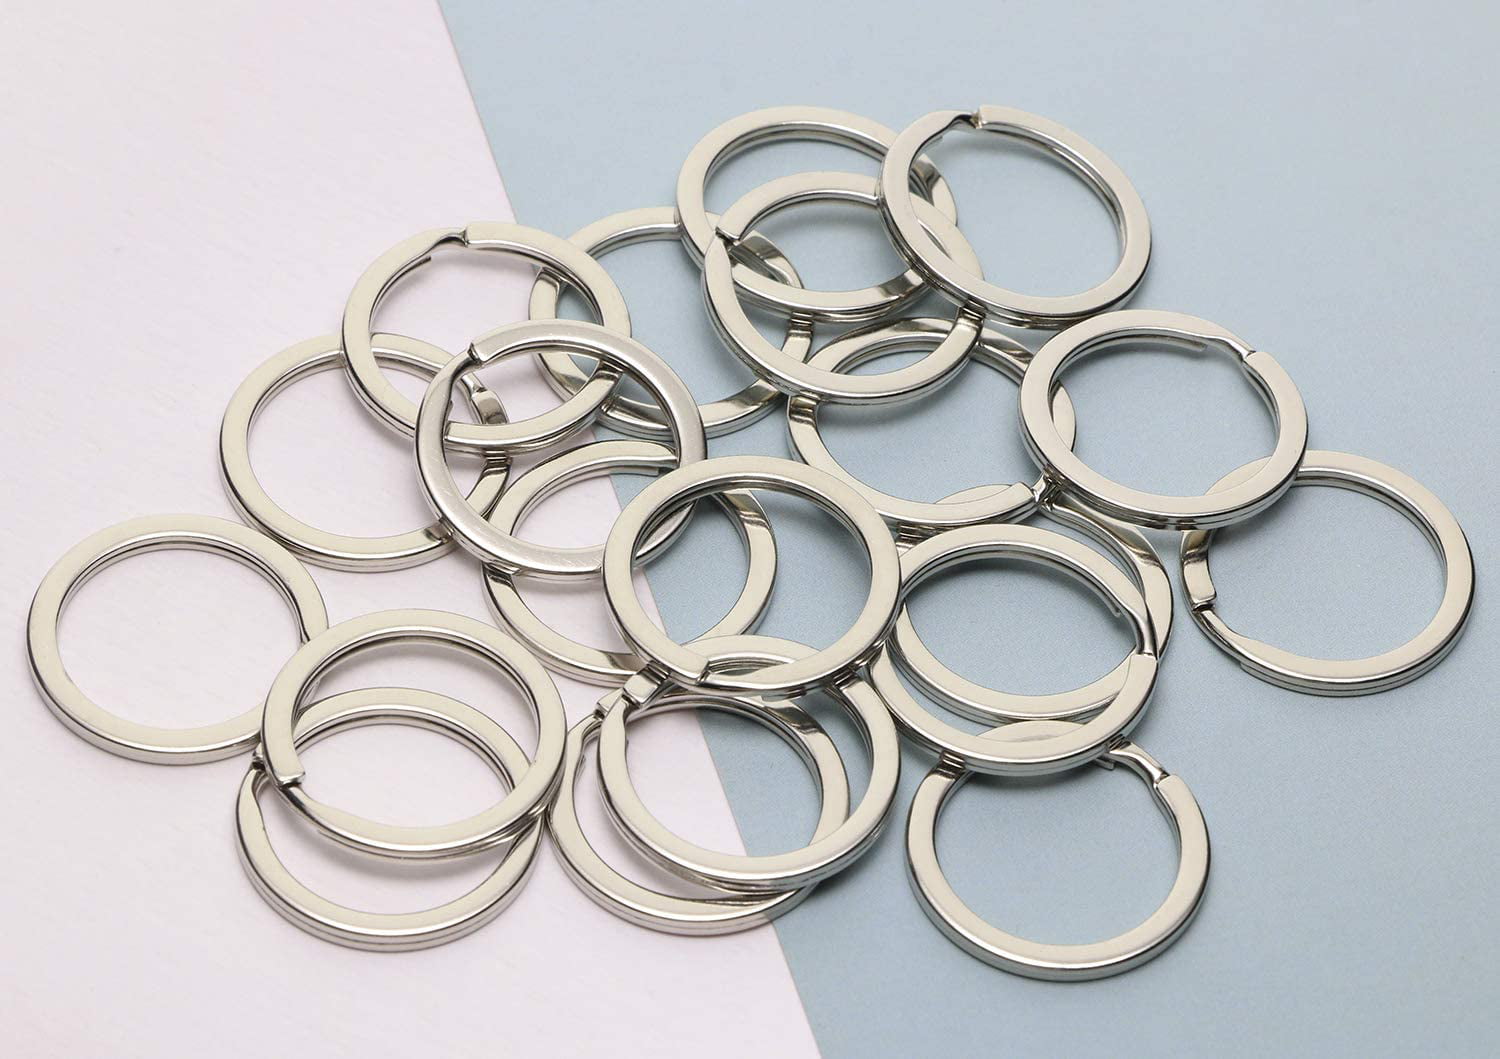 40PCs Silver Gold Split Key Ring Circle, Metal Flat Key Chain Rings with 4  Sizes for Dog Tag DIY Jewelry Car Key Attachment